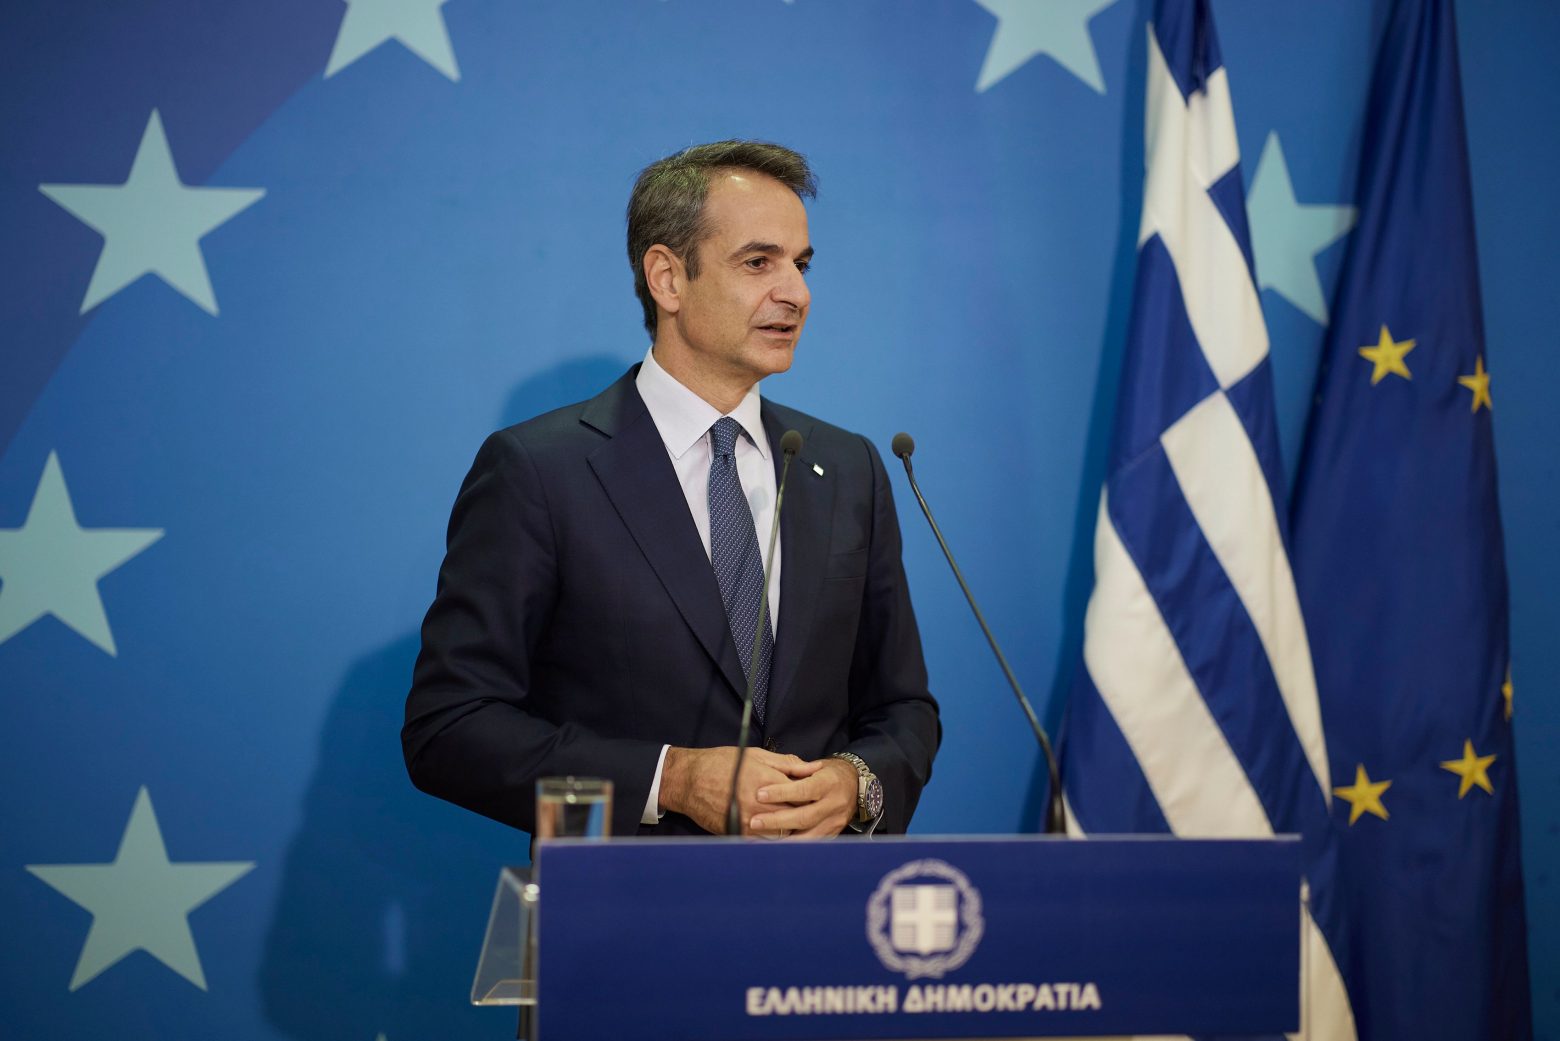 Greek PM to inform European leaders about Turkish proclivities at the Thessaloniki Summit